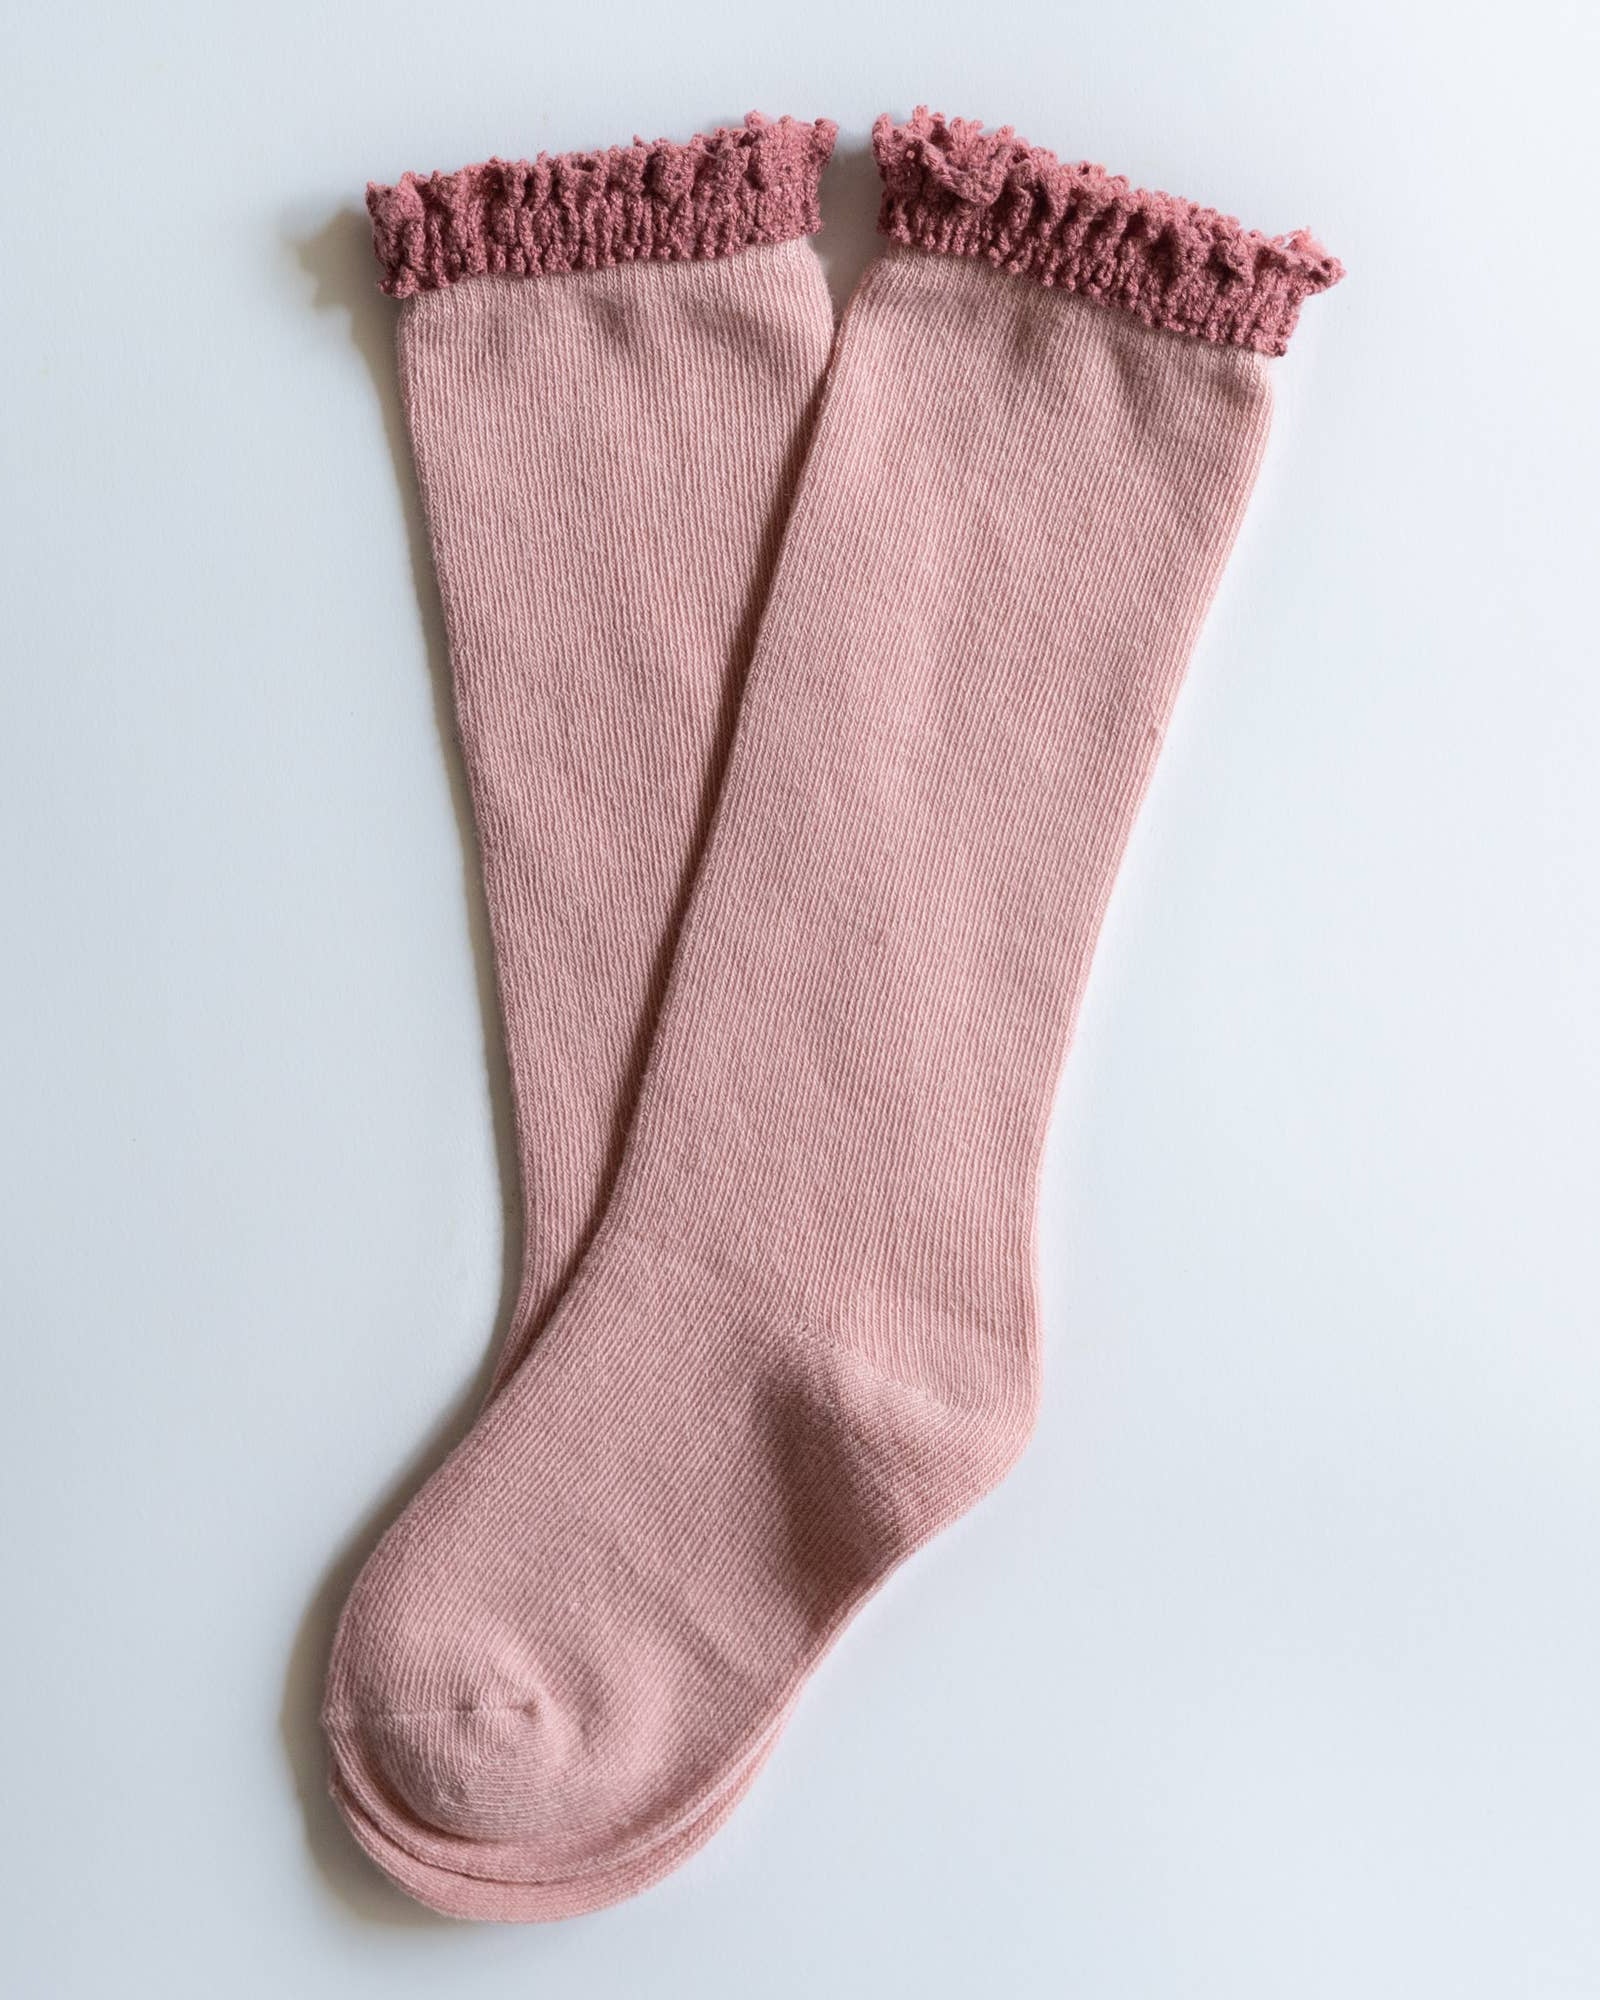 Blush Lace Top Knee High Socks  A Touch of Magnolia Boutique   